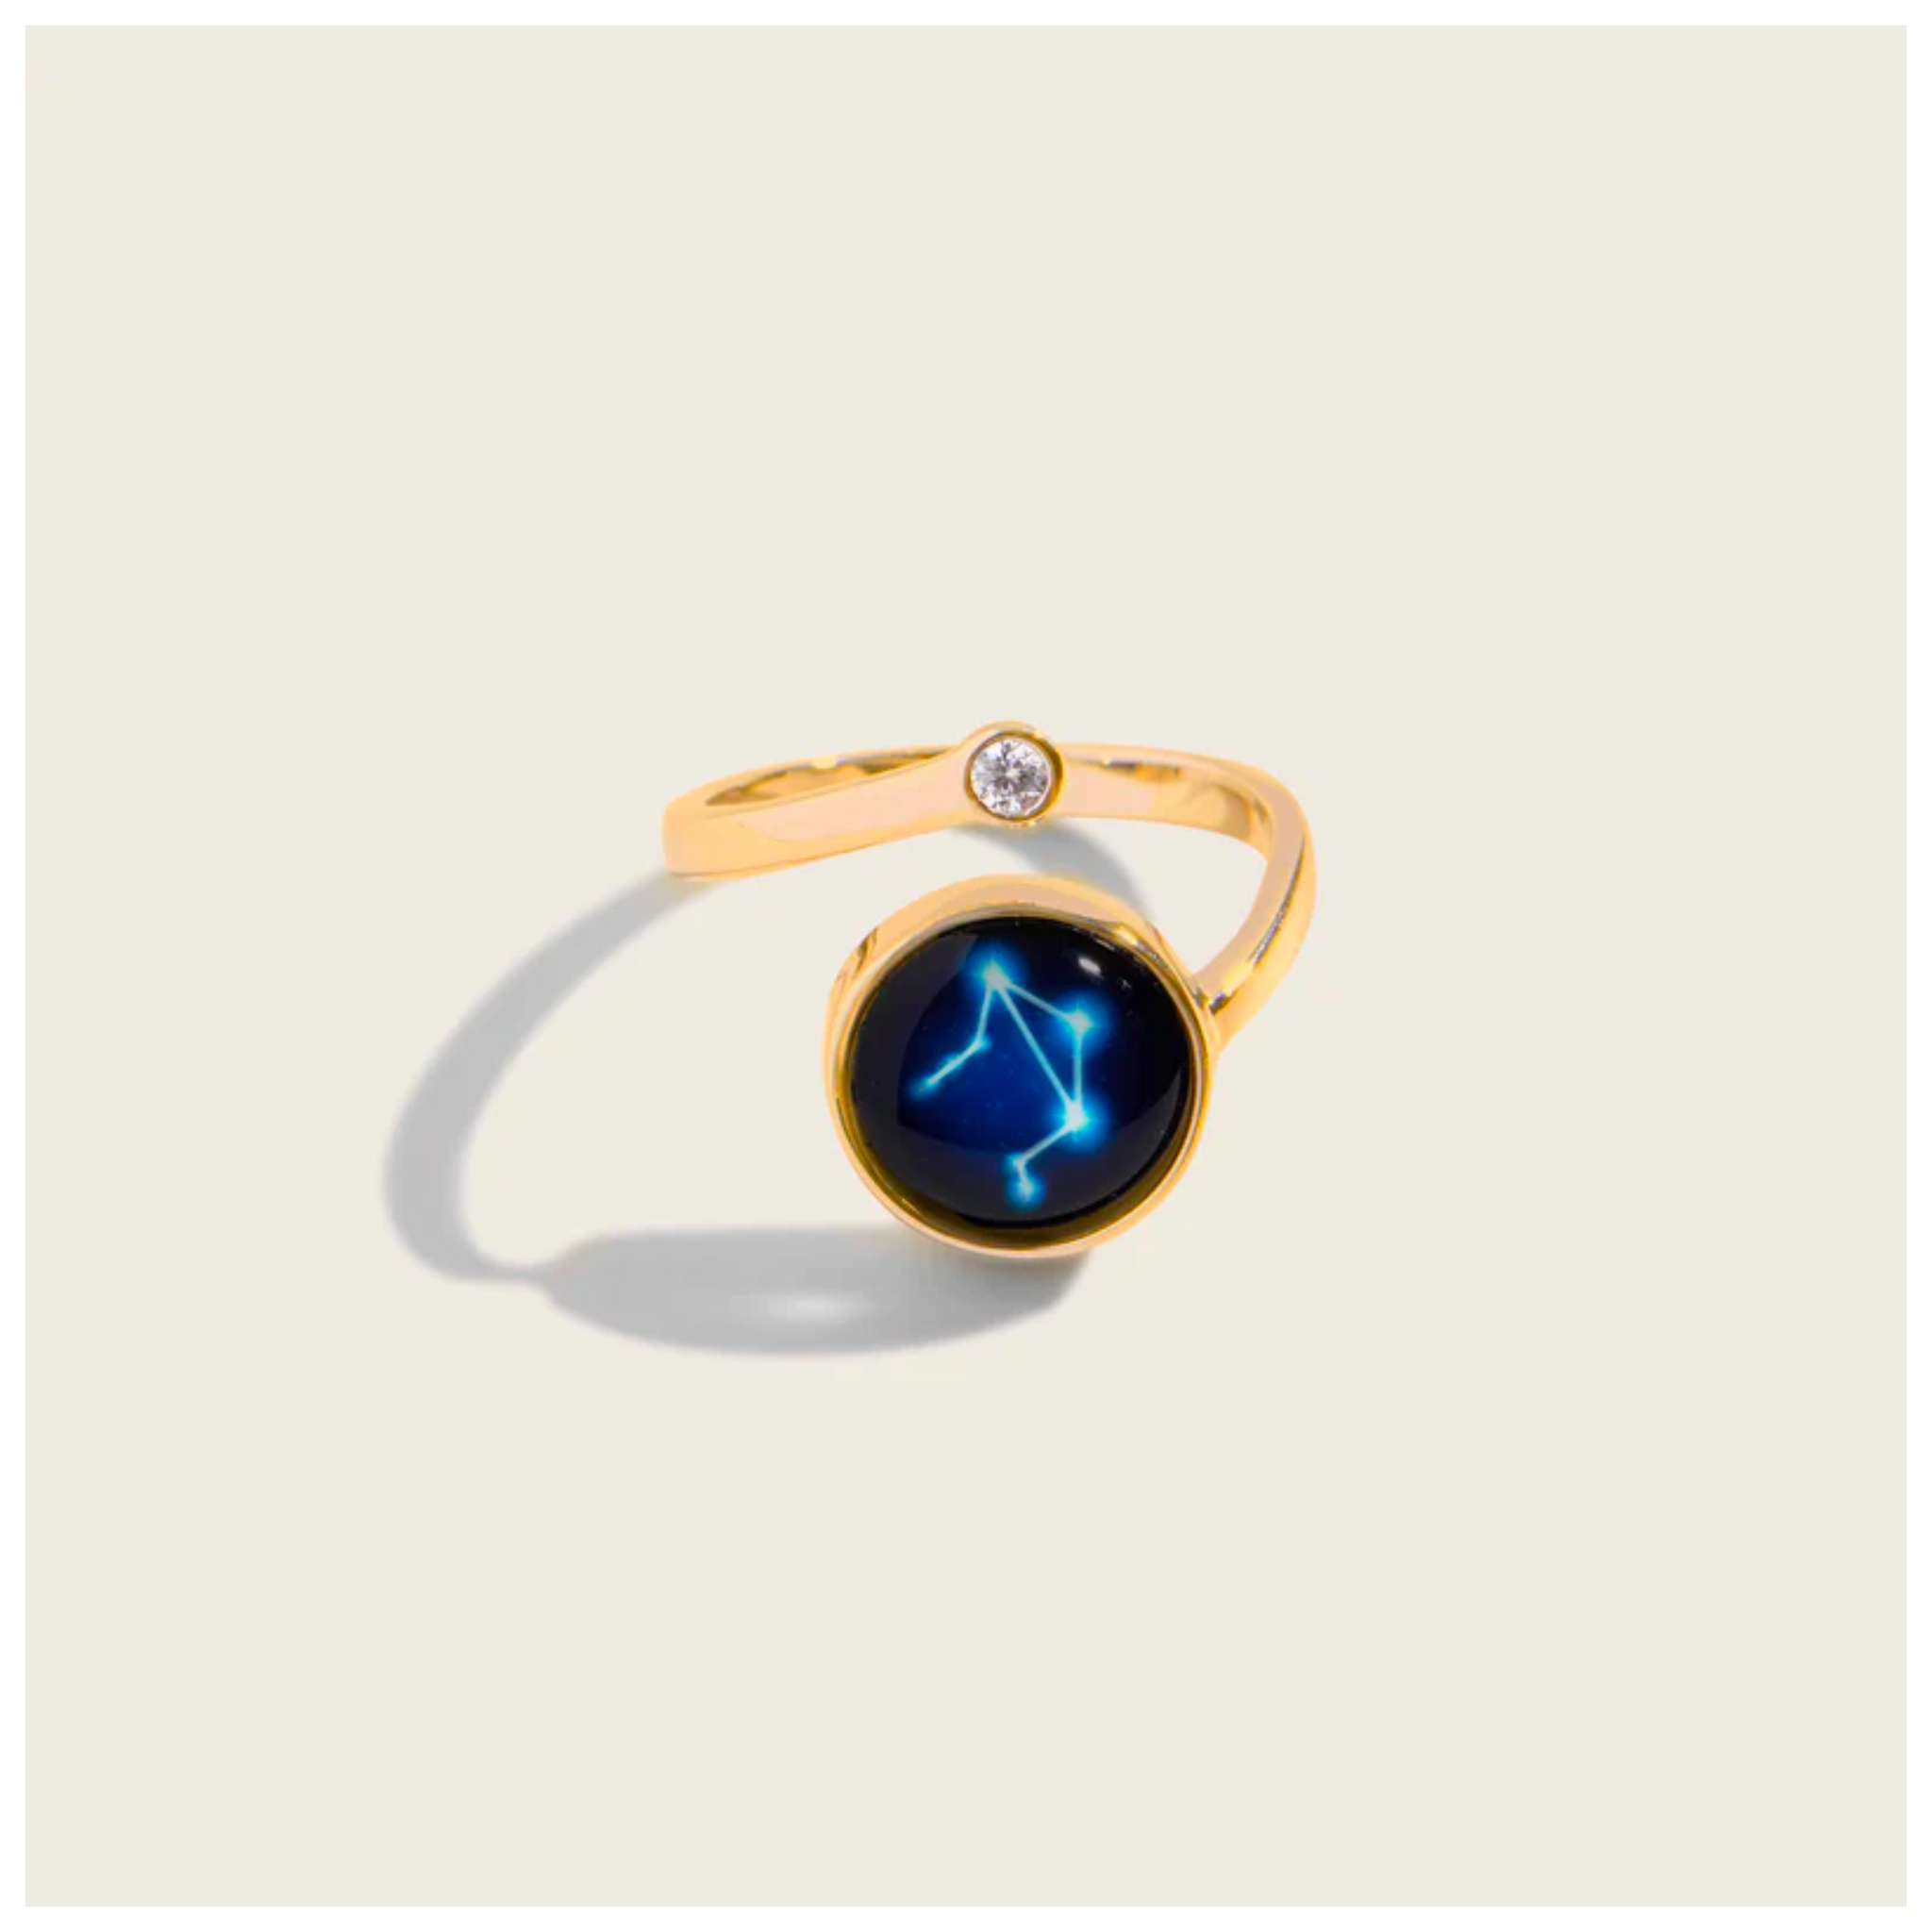 Astral Cosmic Spiral Ring in Gold